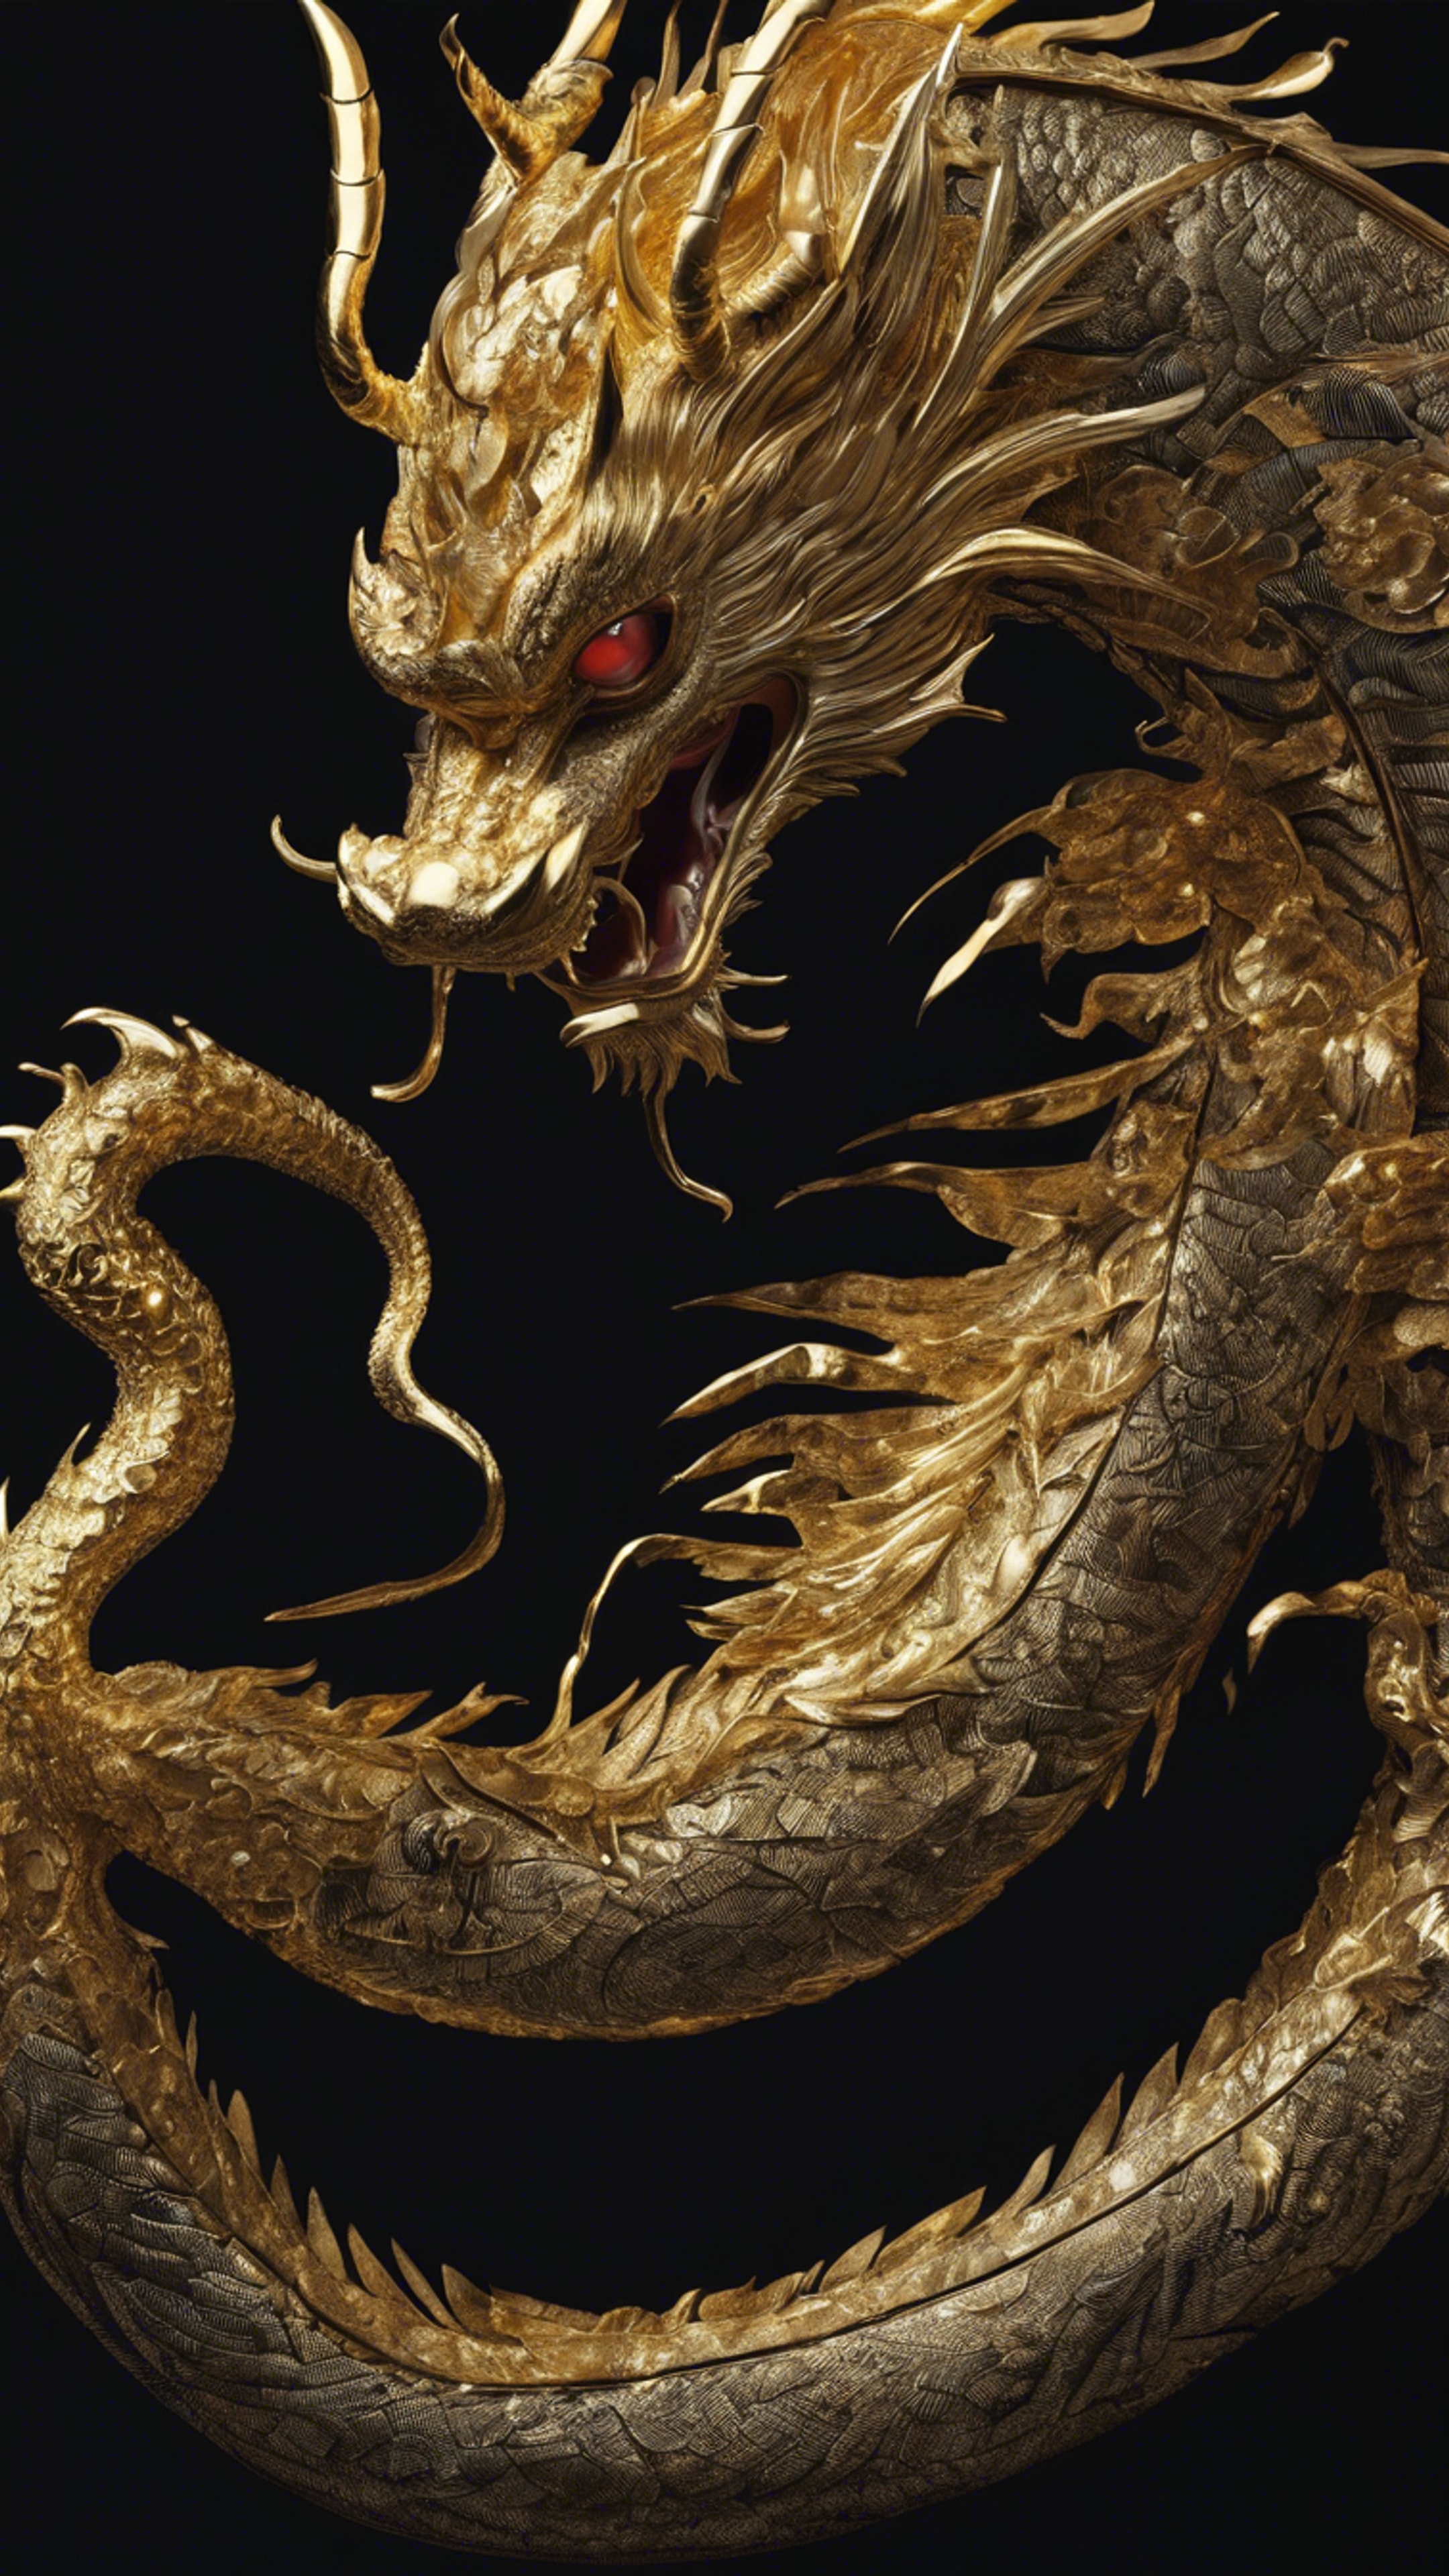 Detailed Japanese dragon rendered in gold leaf on a black background.壁紙[3dbf2113e361411080c0]